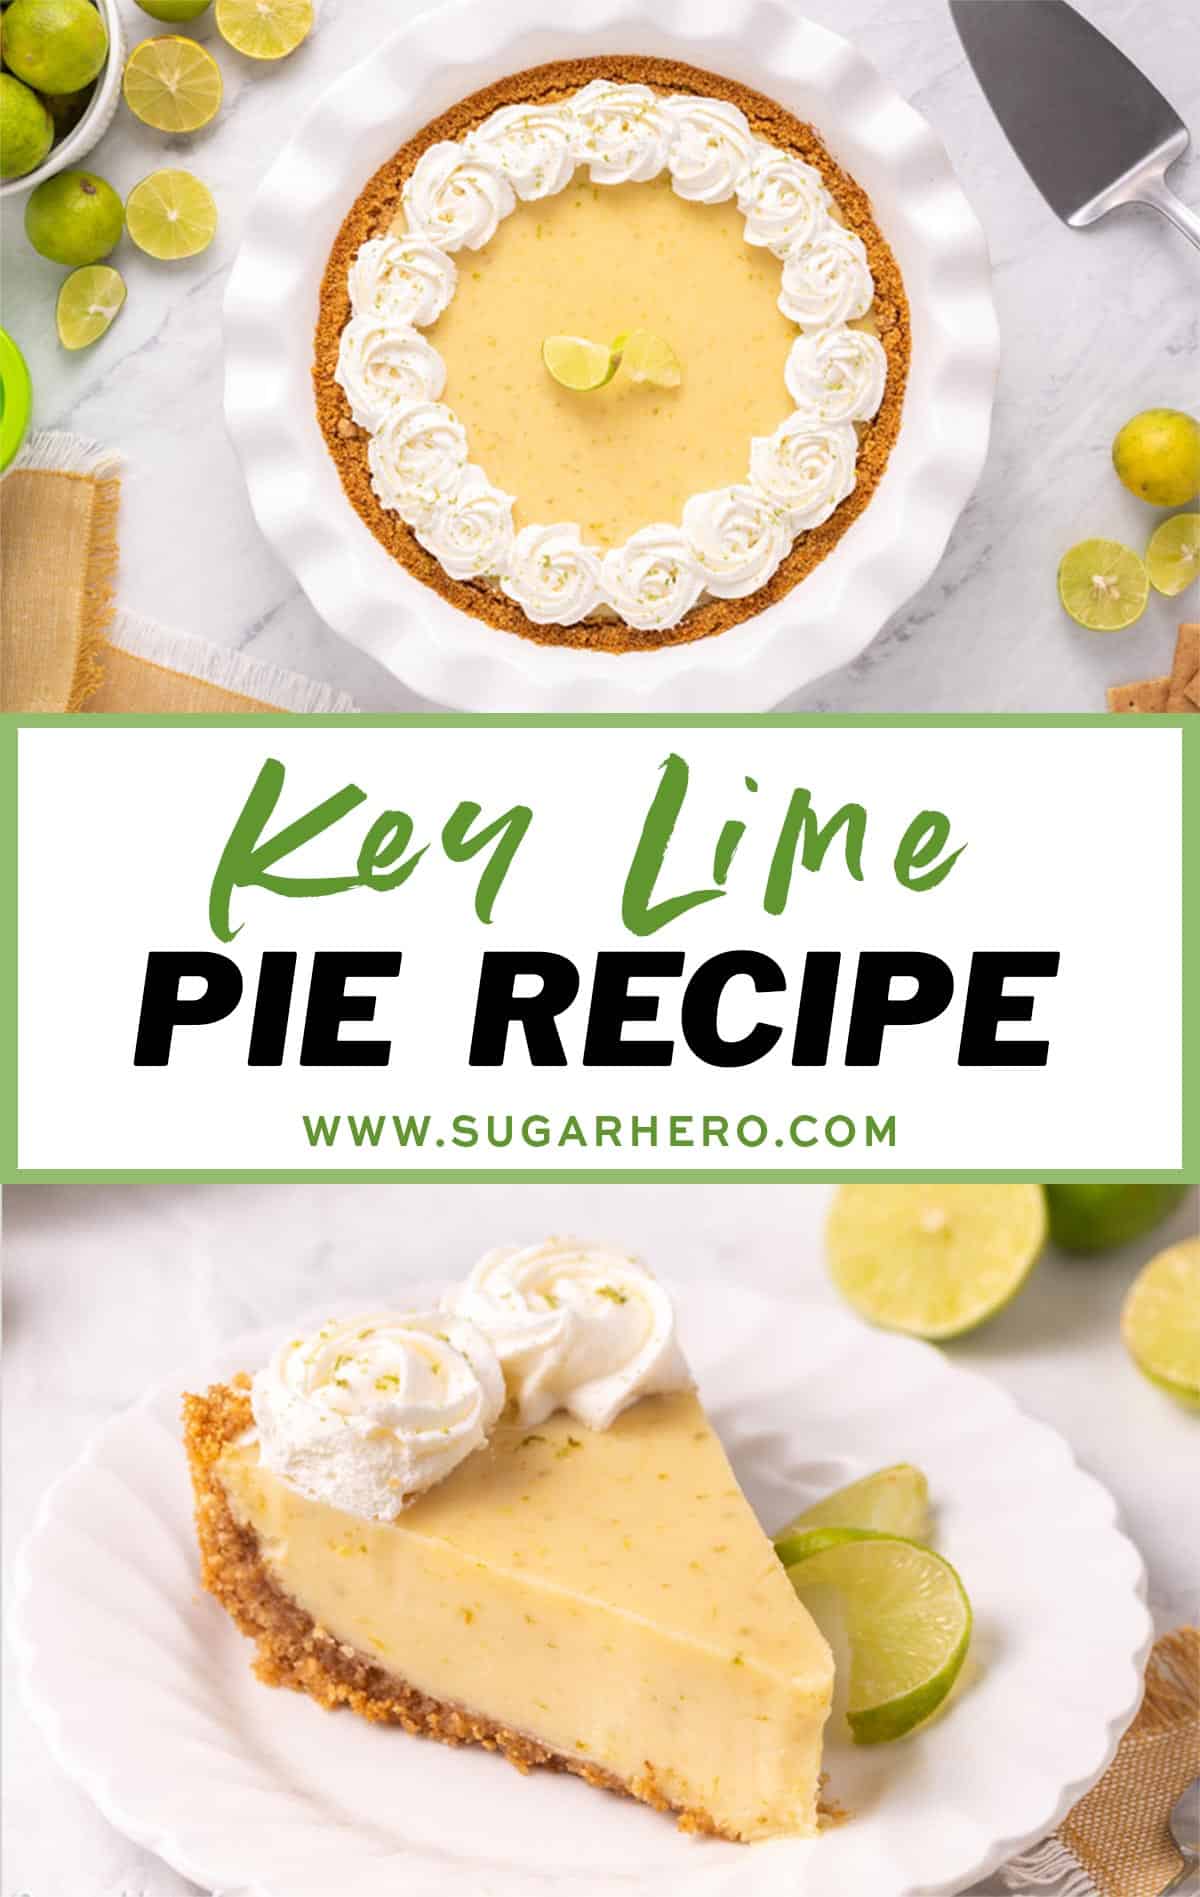 Pinterest collage showing a key lime pie overhead with a slice of key lime pie below it.